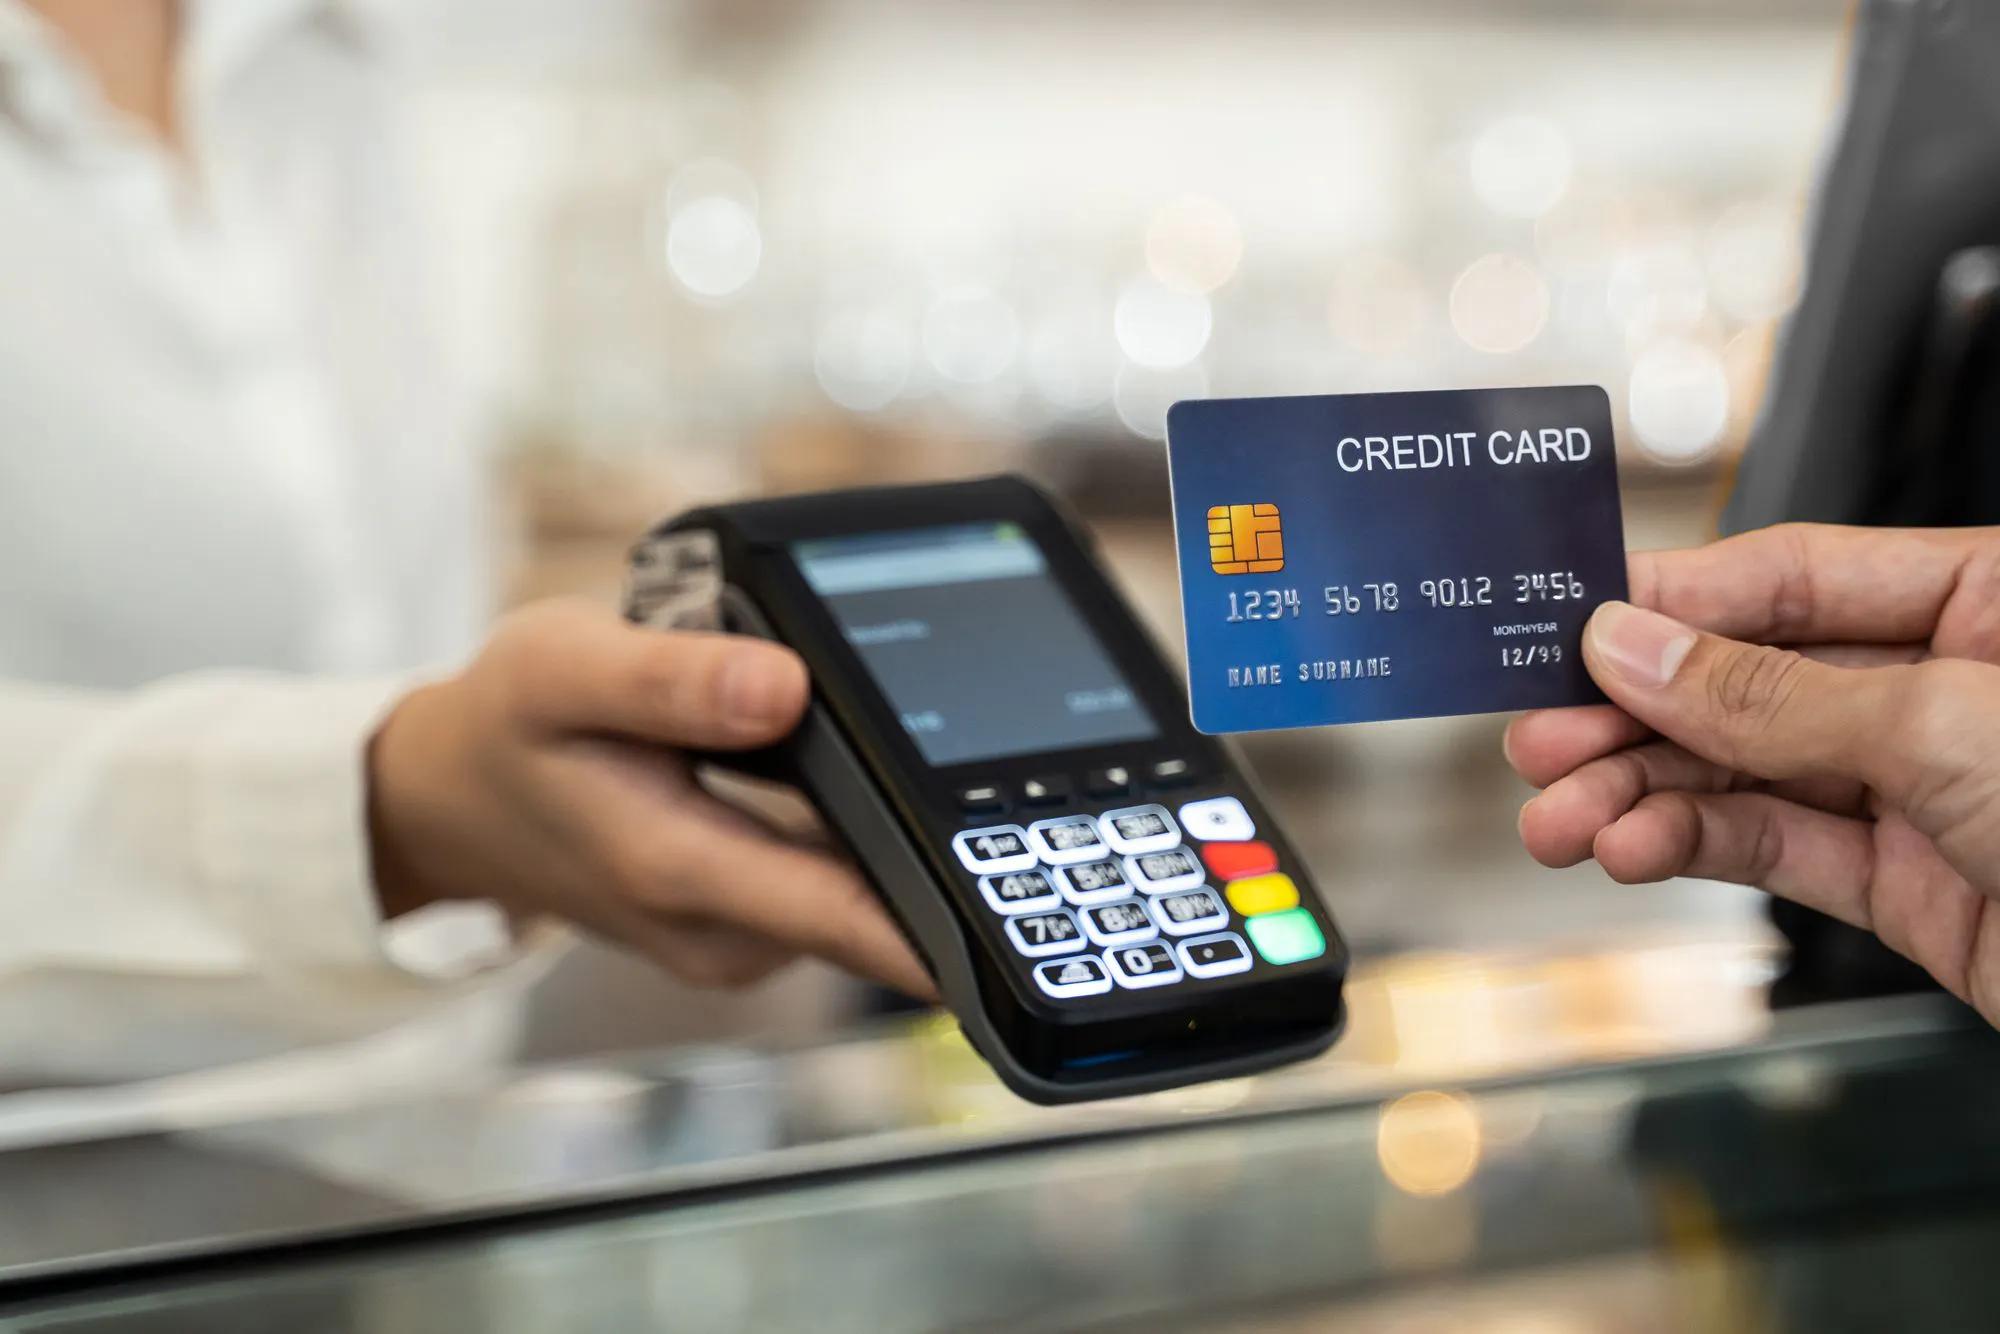 Keeping It In The Cards: Getting the Best Deal for Credit Card Processing Services | Image Credit: © kawee / stock.adobe.com